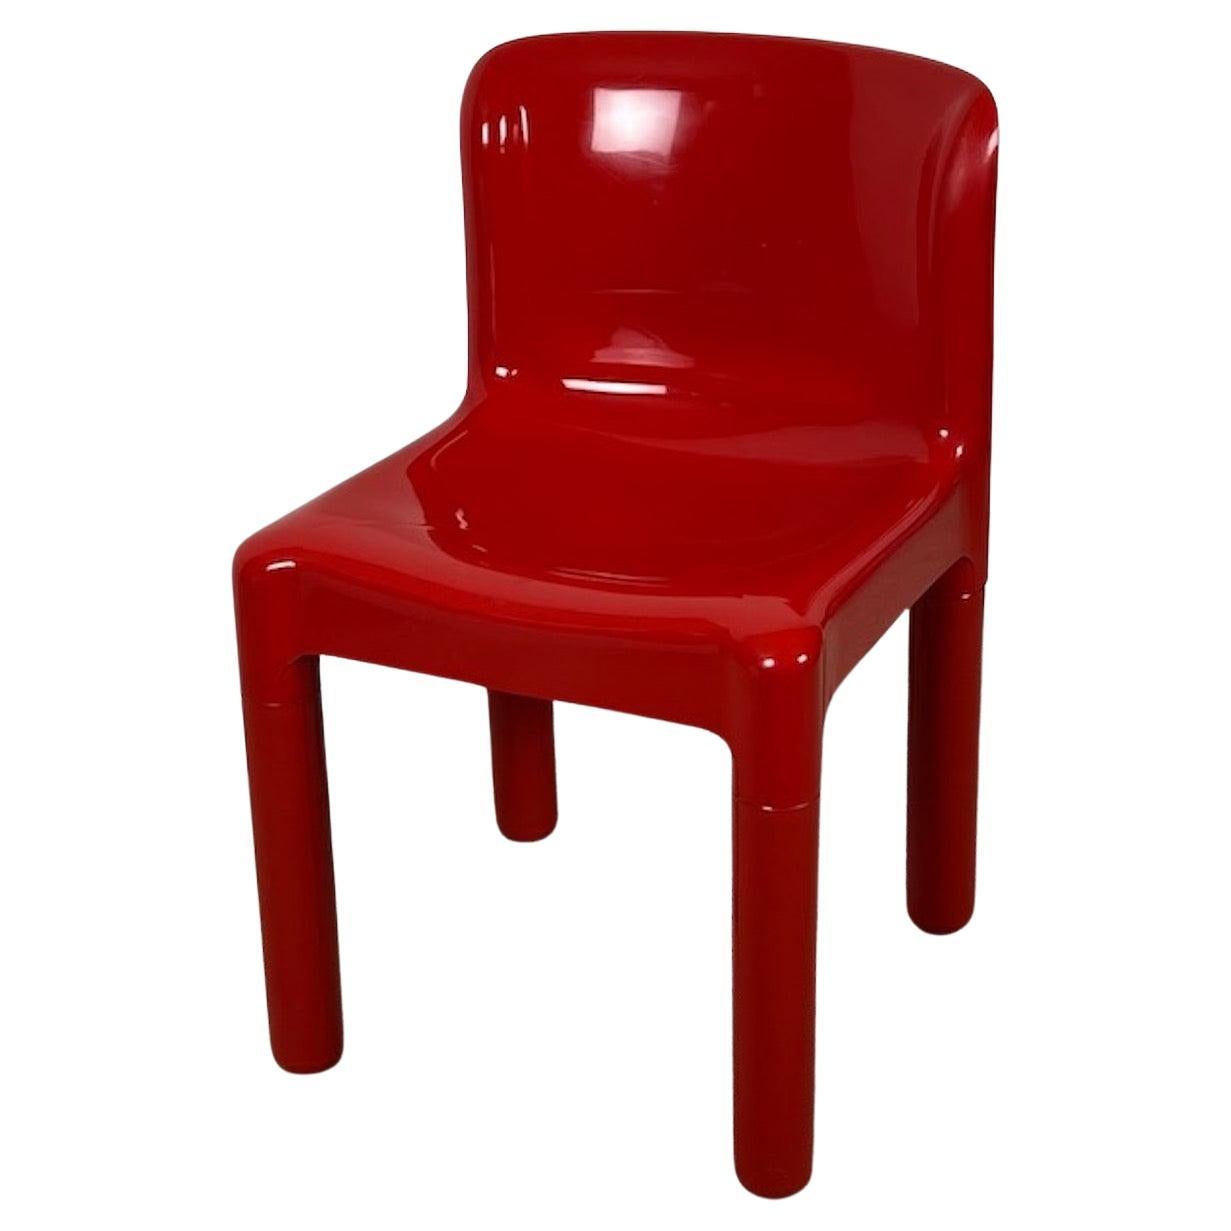 Kartell 4875 Chair by Carlo Bartoli in Glossy Red, 1980s Edition